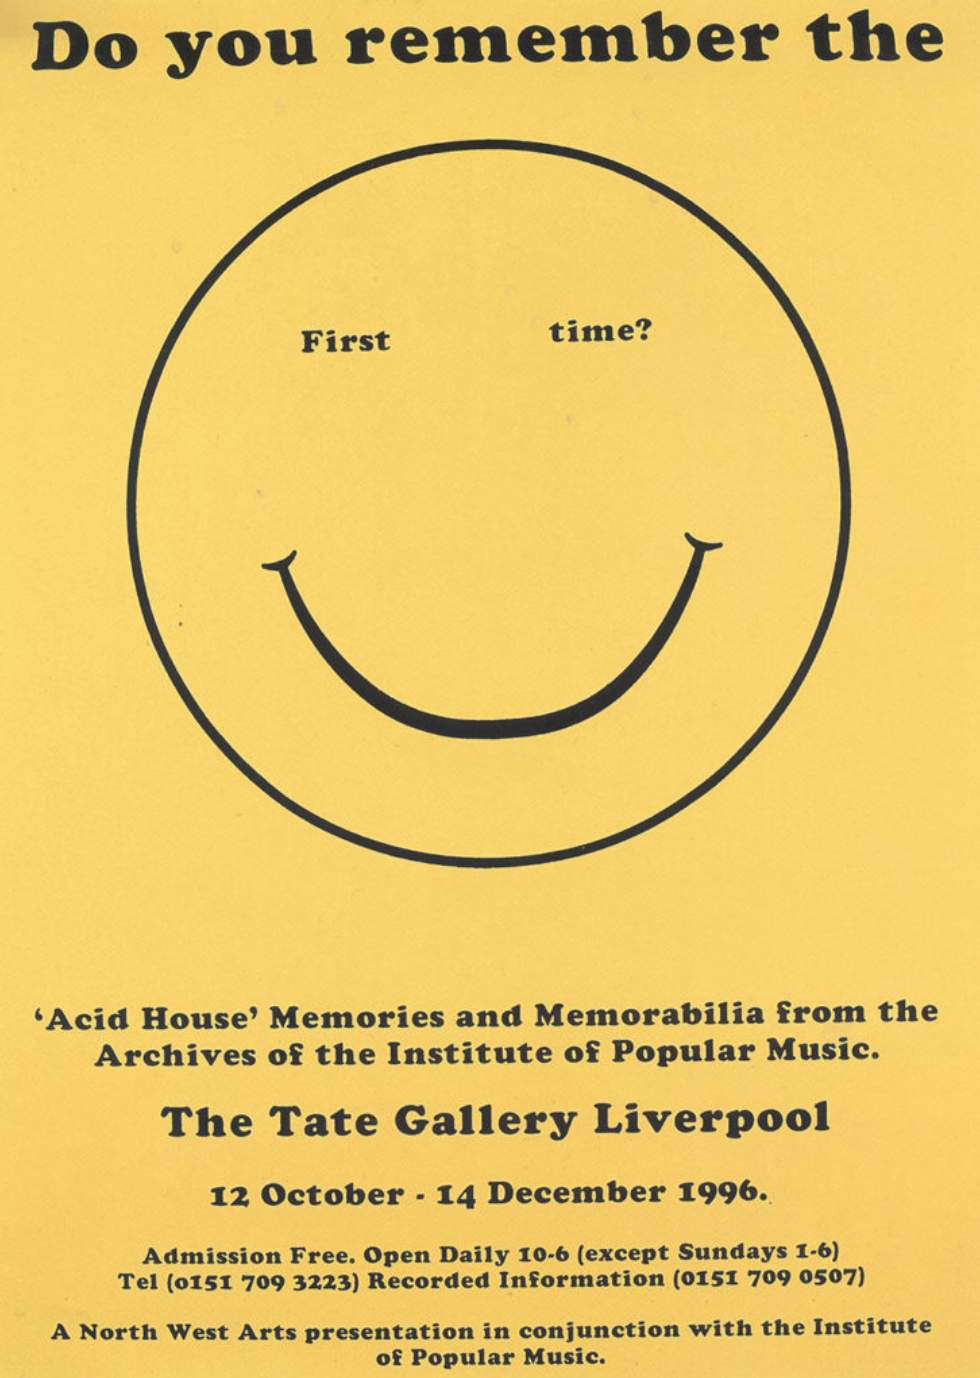 Jeremy Deller - Do you remember the First Time?